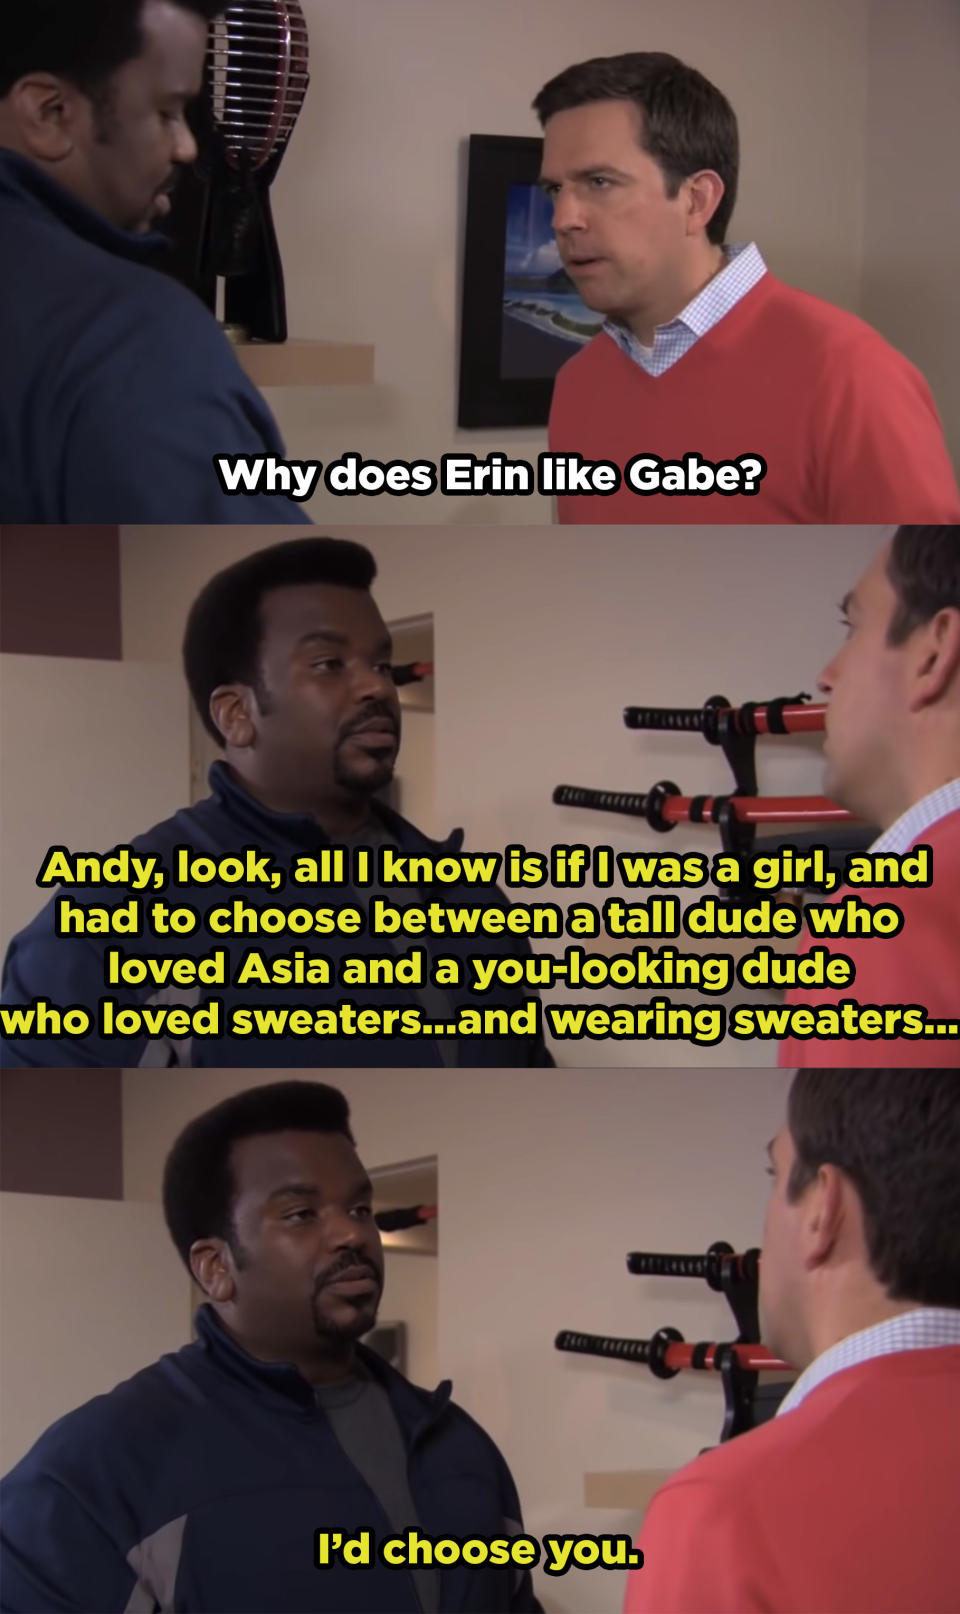 Darryl tells Andy that if he were a girl, he'd choose Andy over Gabe.